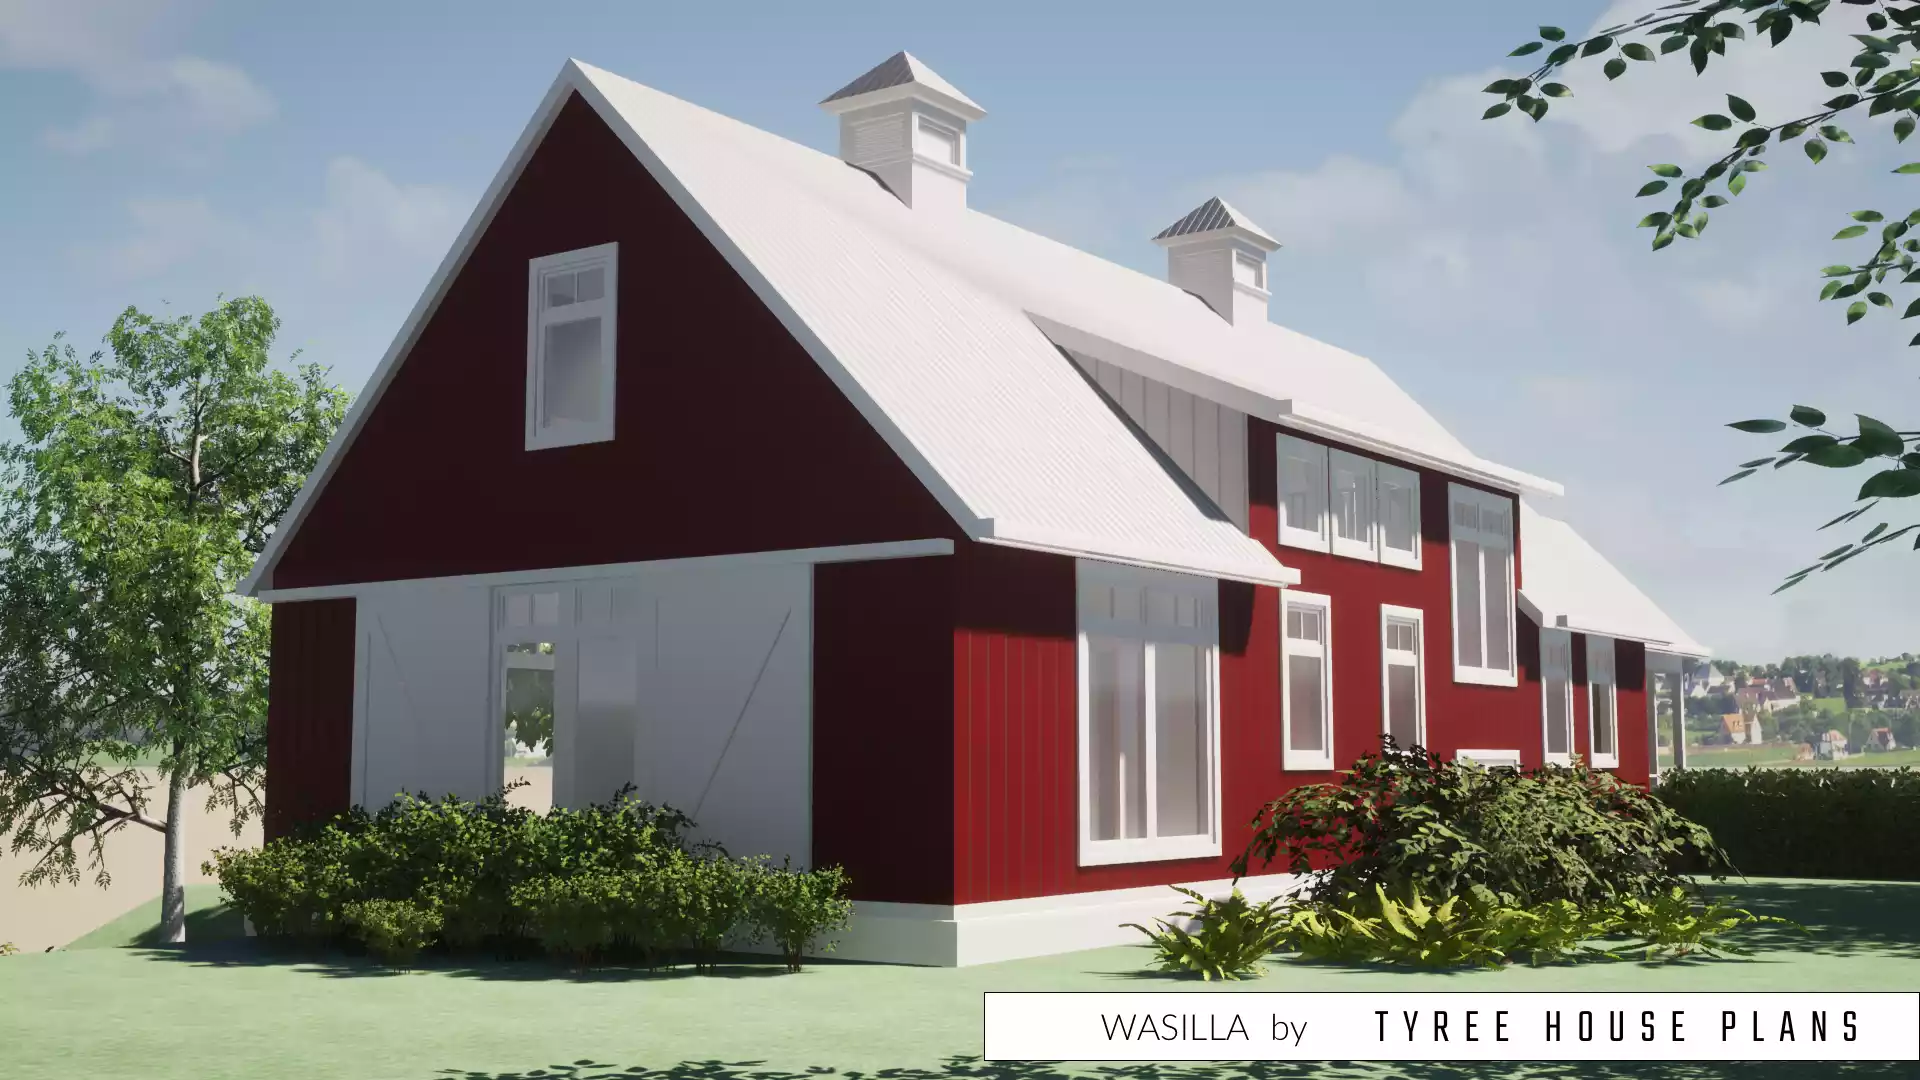 Right side with bedroom windows. Wasilla by Tyree House Plans.